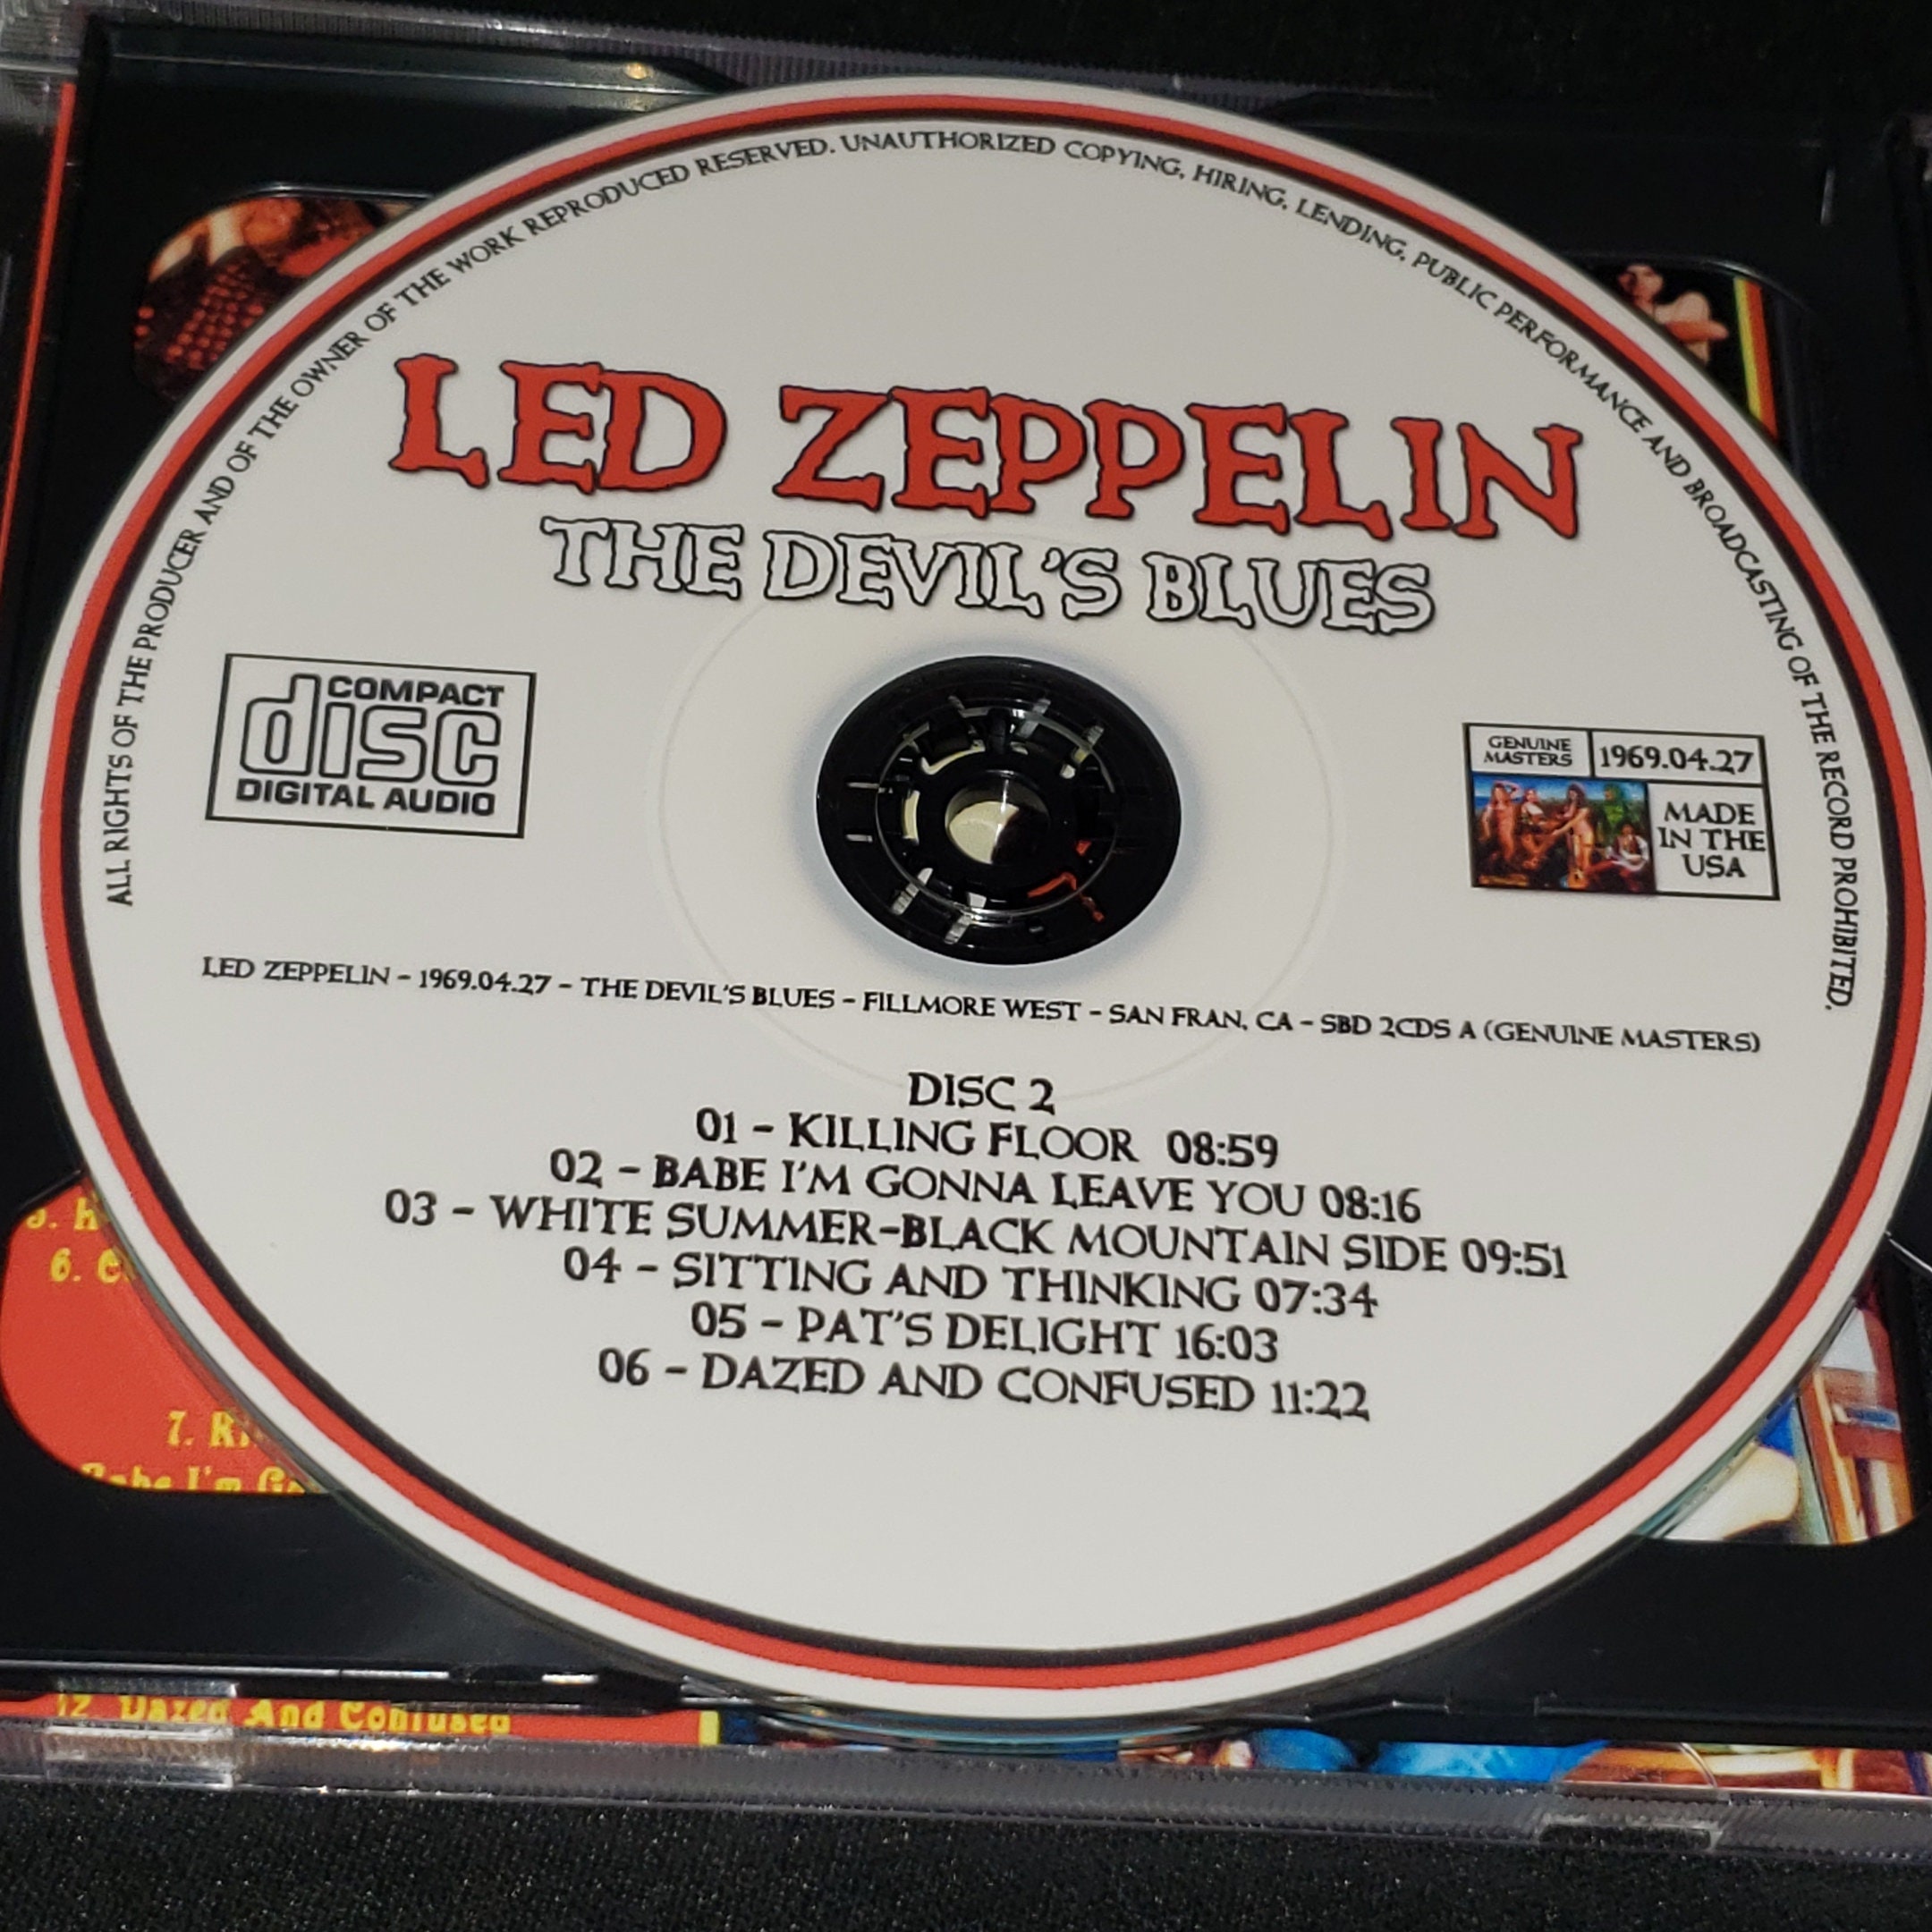 Led Zeppelin Live 2 CD Set the Devil's Blues Live at Fillmore West in 1969  Jimmy Page Robert Plant 